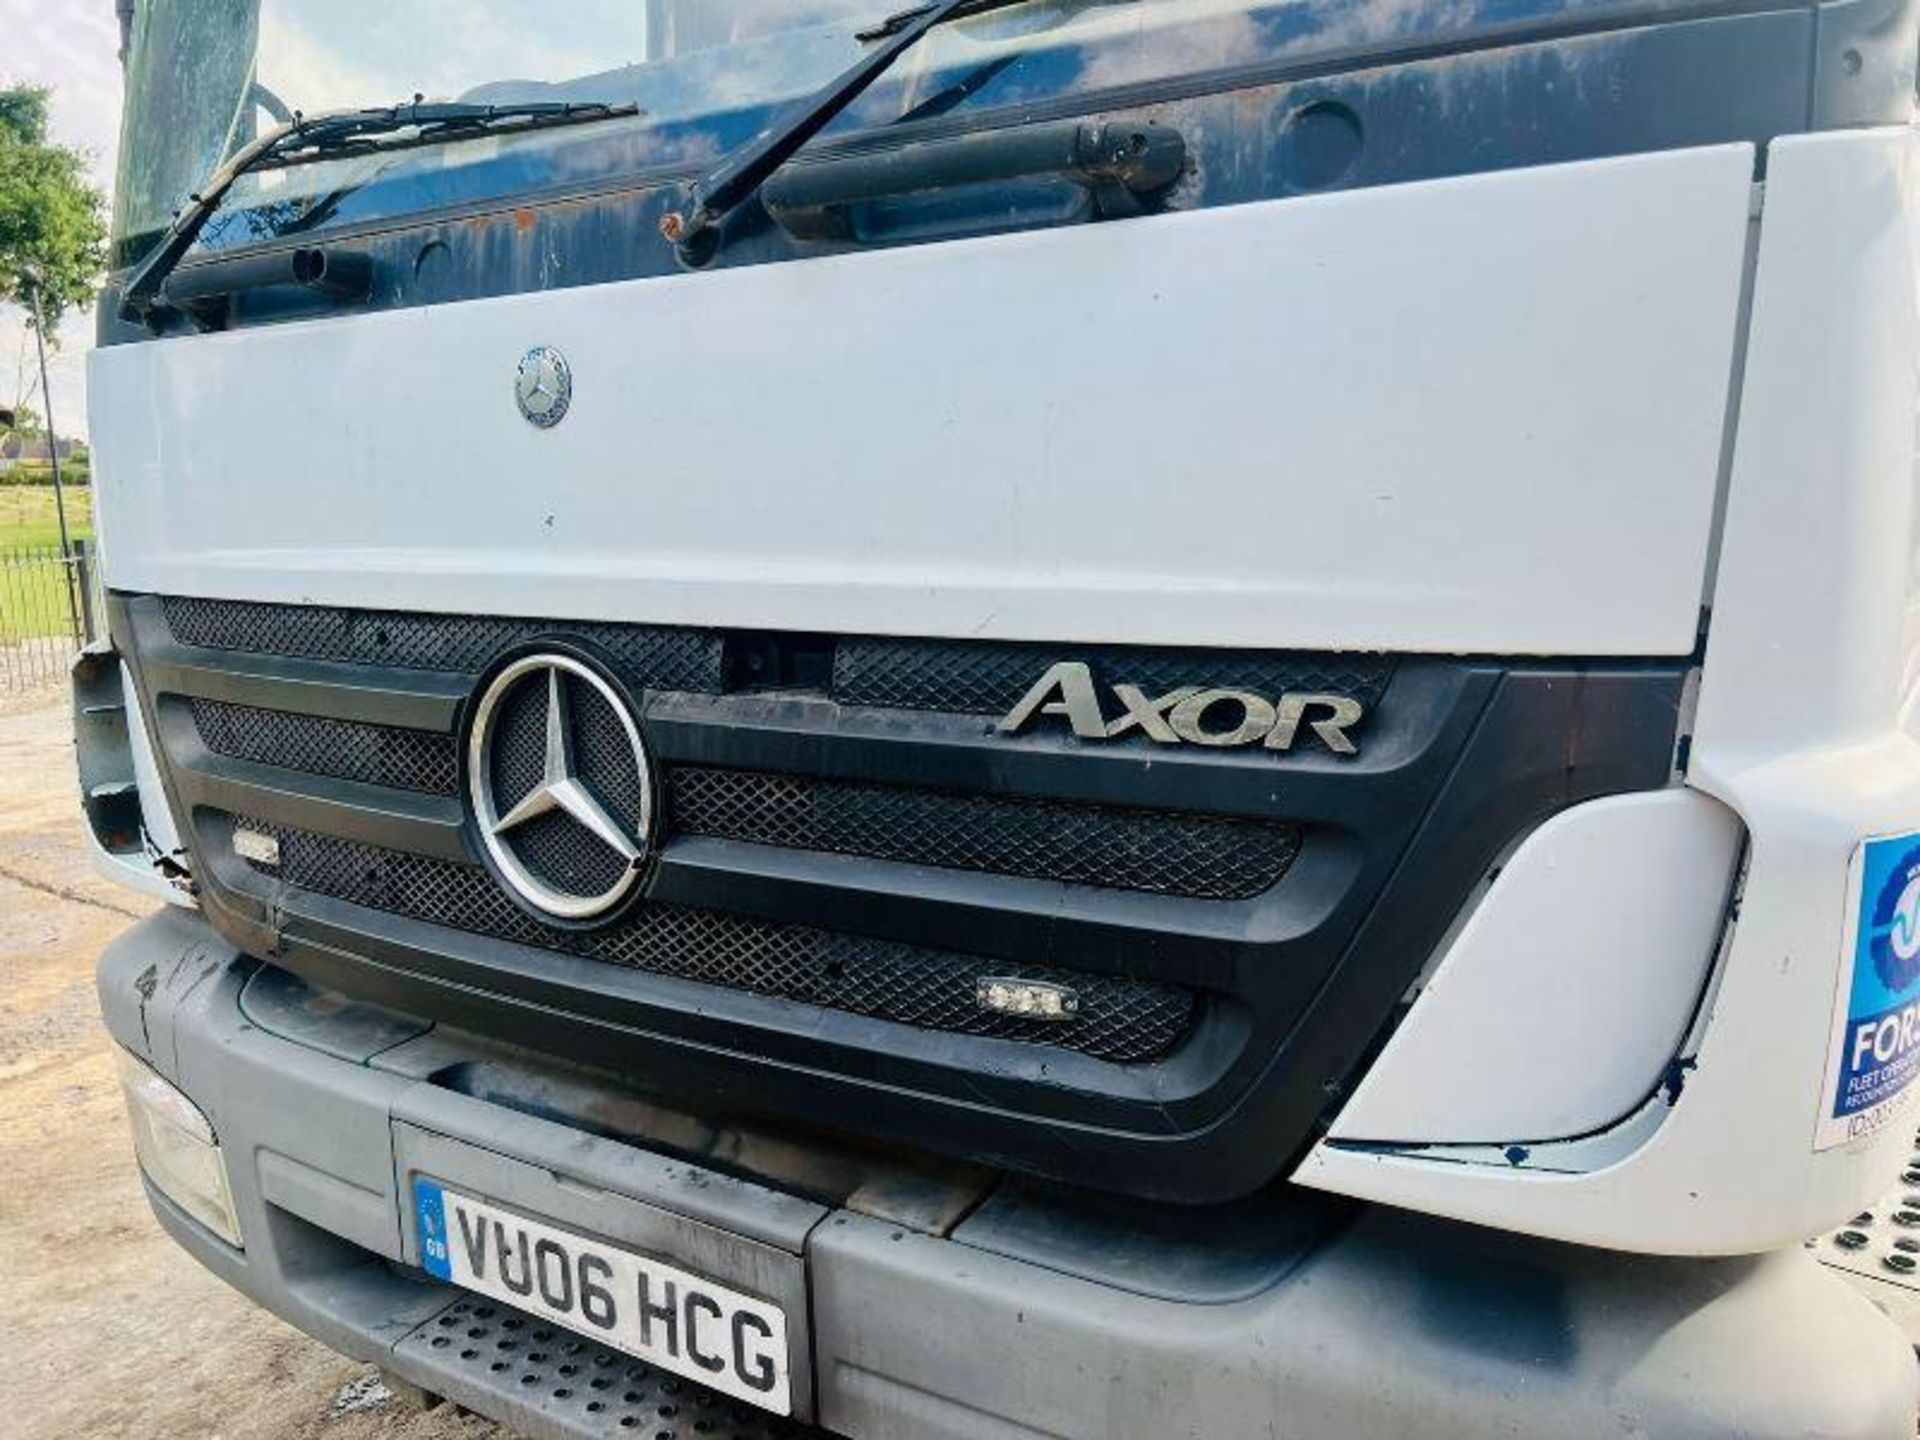 MERCEDES AXOR 6X2 FLAT BED LORRY C/W REAR LIFT - Image 3 of 13